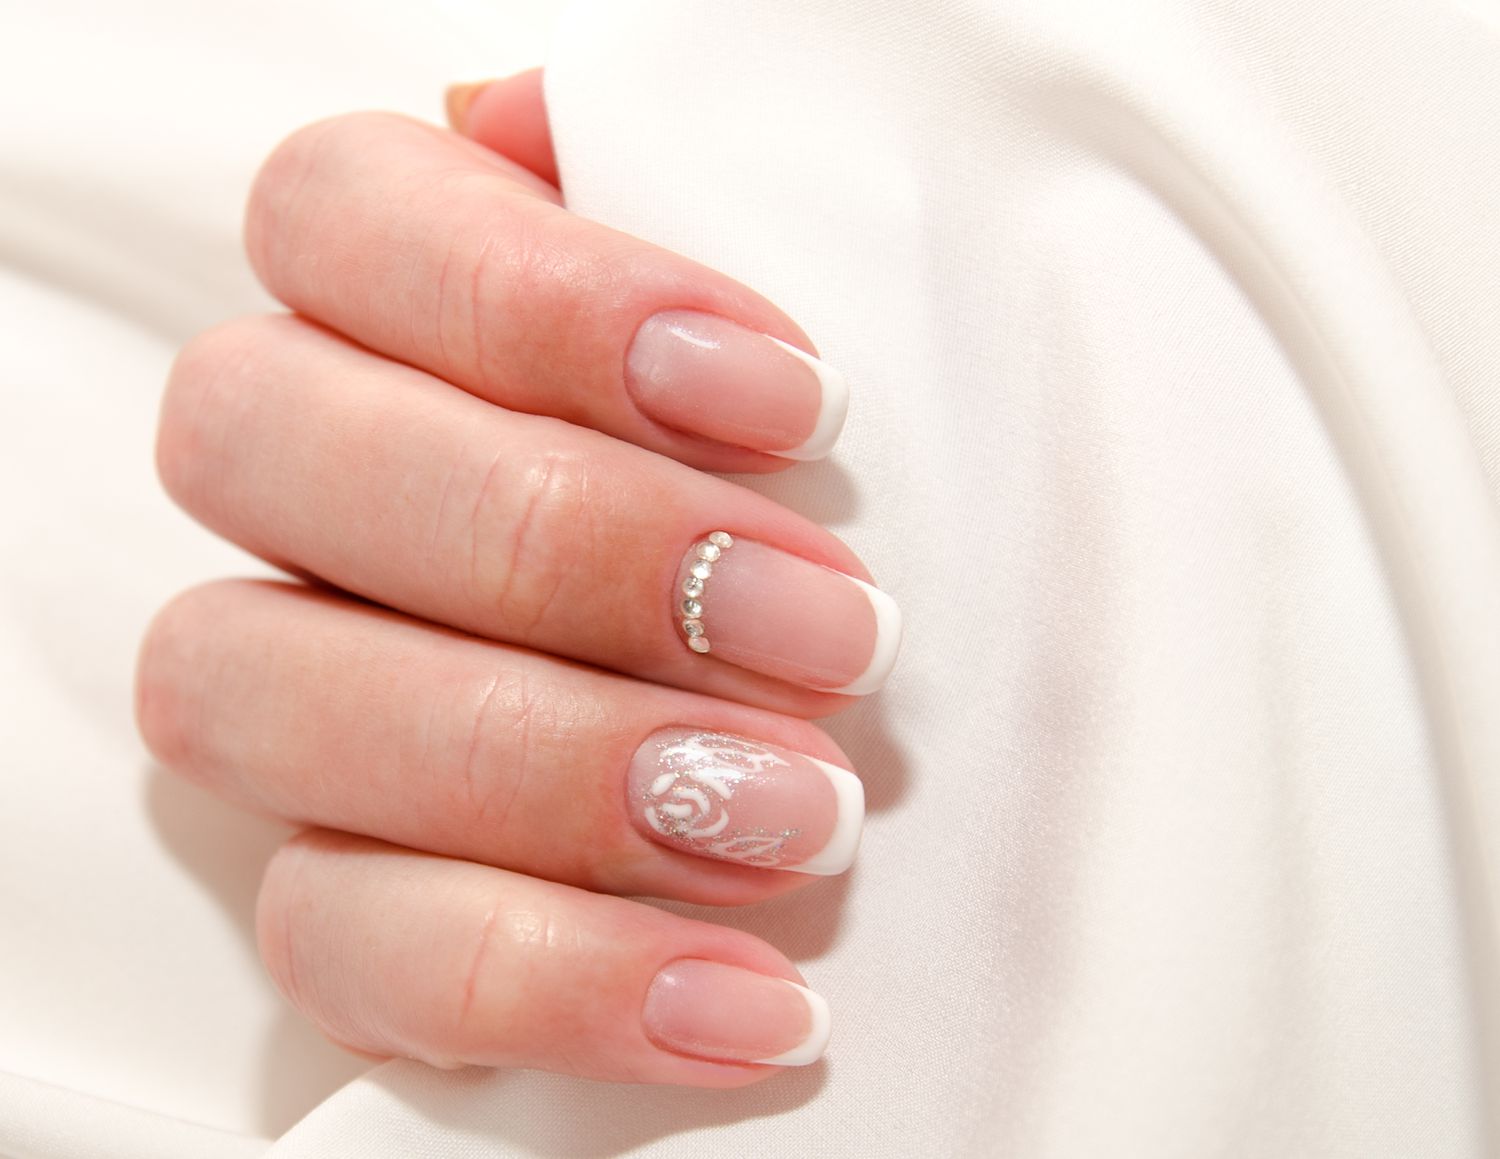 Woman's nails with beautiful french manicure fashion design